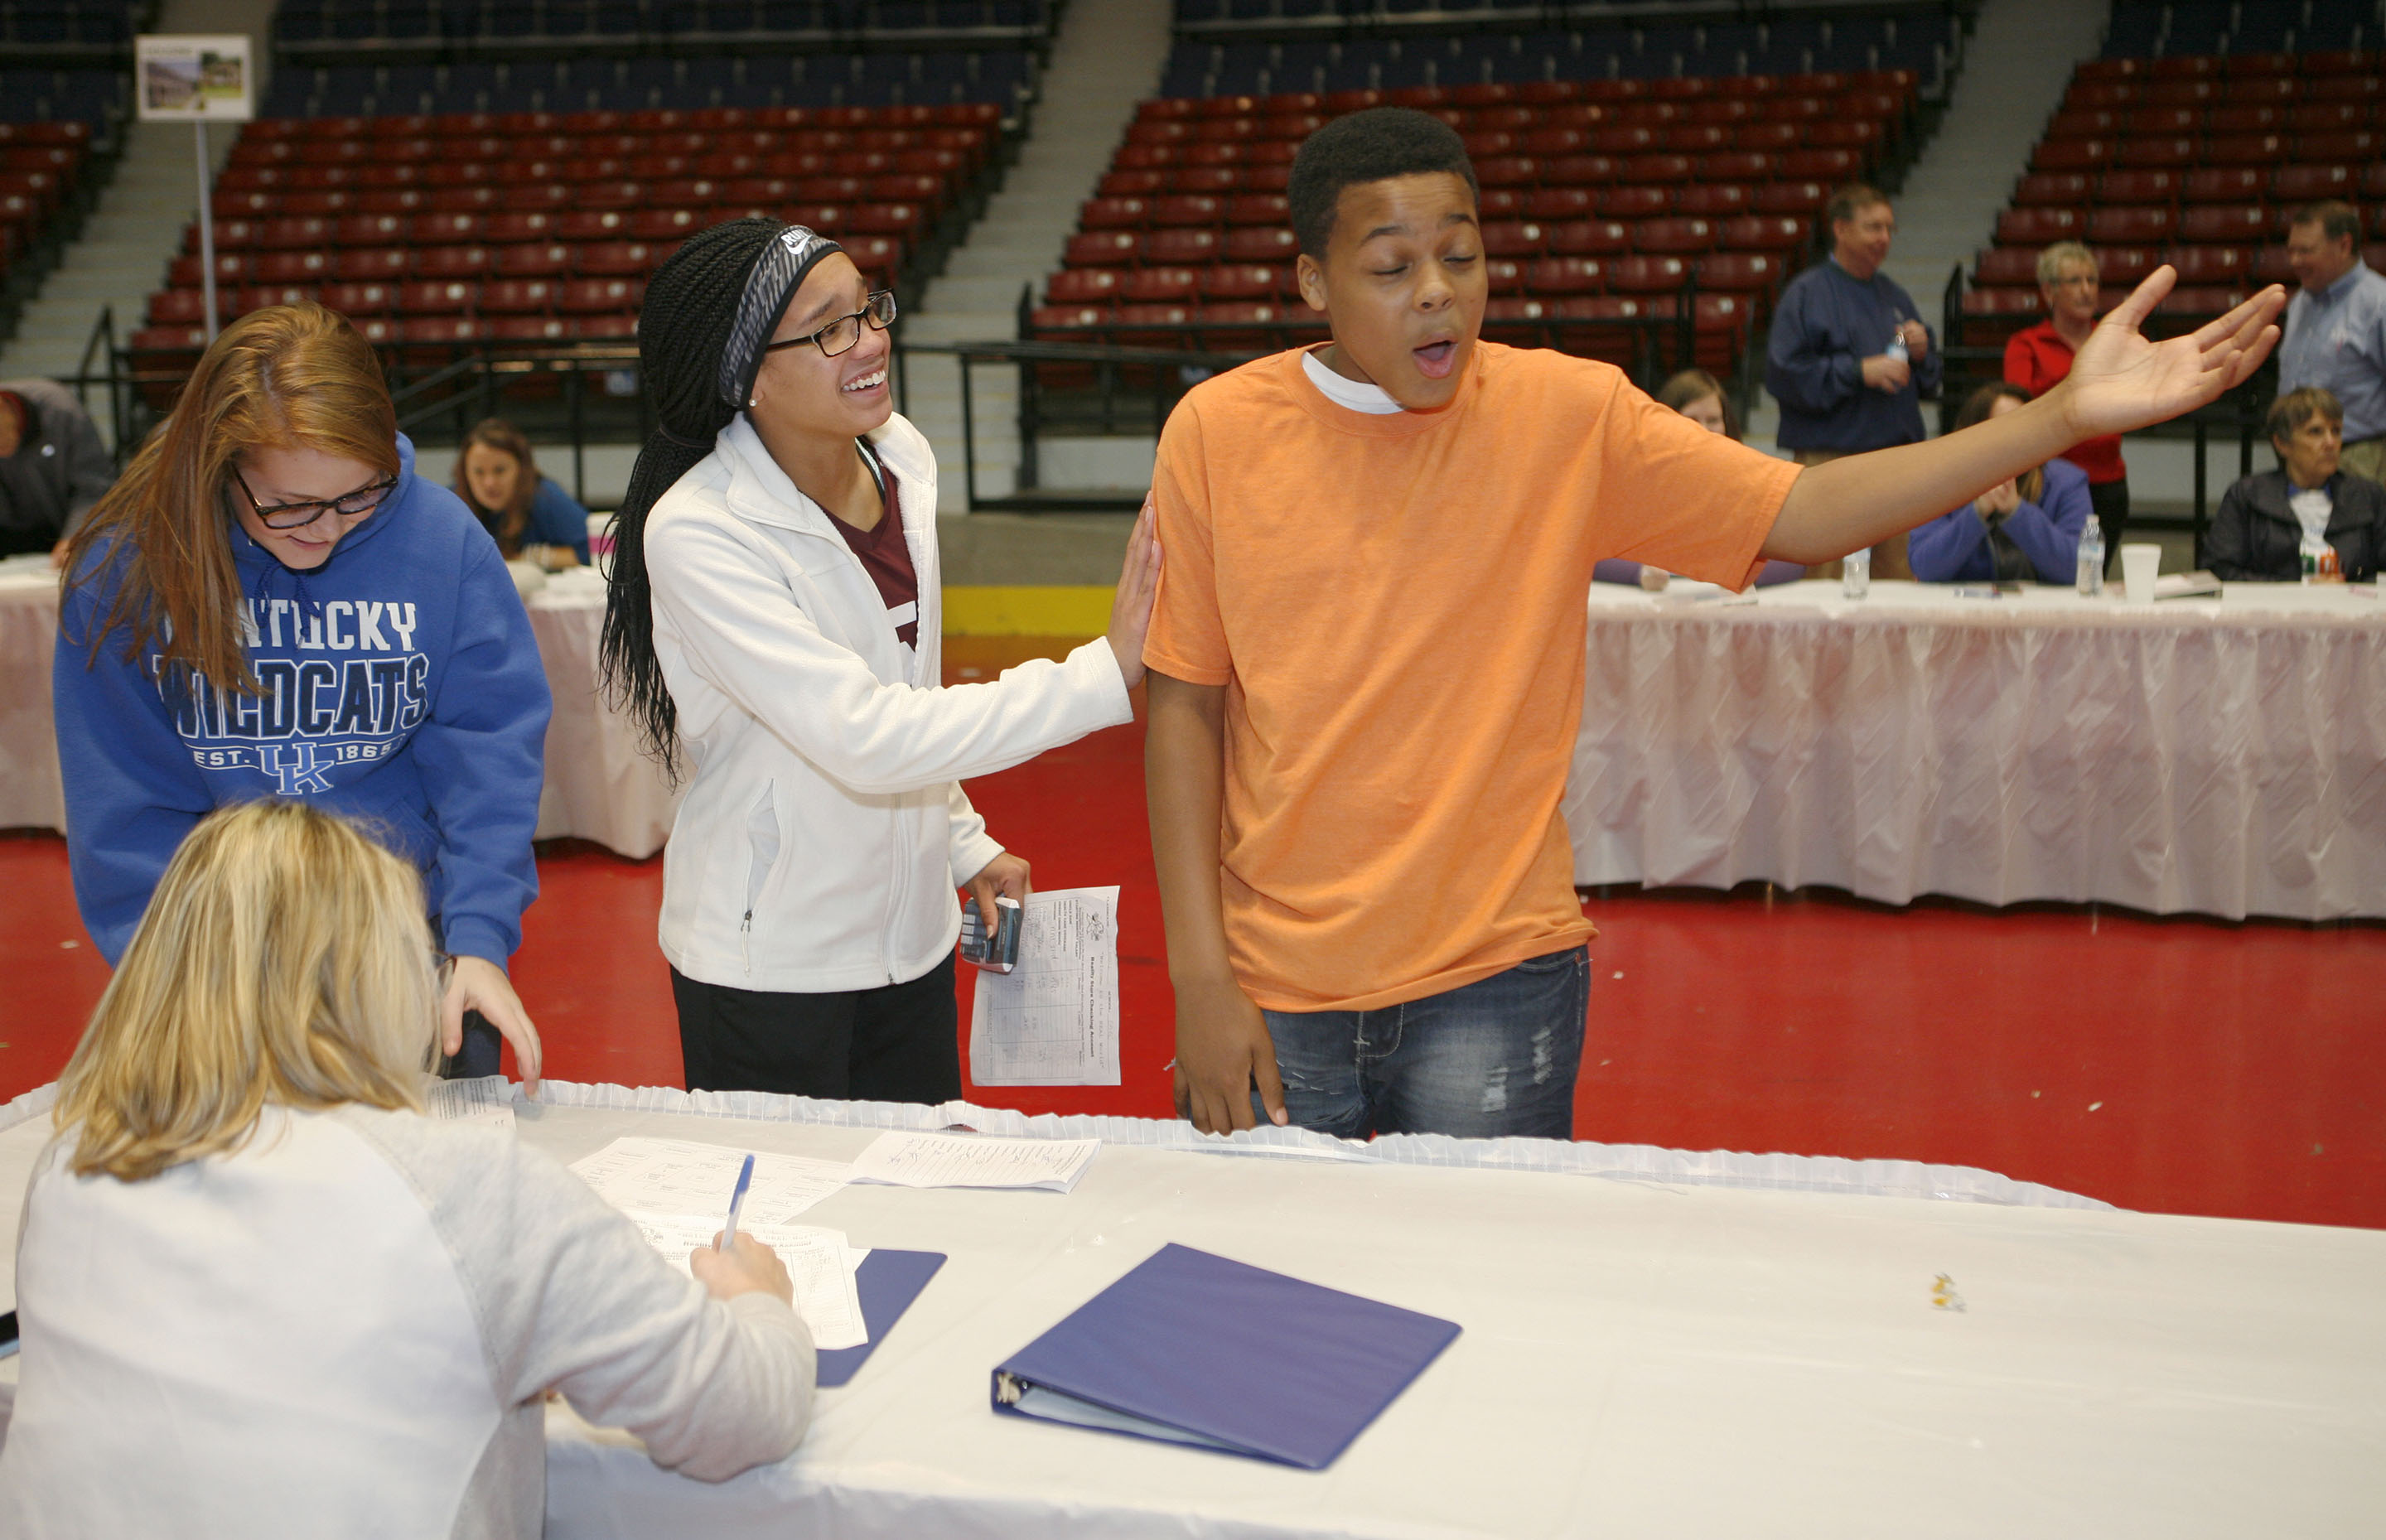 Zyshonne Atkinson, right, bemoans his fate as Elkhorn Middle School (Franklin County) classmates Rosa Kennedy, center, and Kaylee Payton listen. Atkinson was complaining after learning about the cost of medical/dental services from Frankfort Area Chamber of Commerce Member Services Director Suzy Hosley at the chamber’s Reality Store at the Frankfort Convention Center.